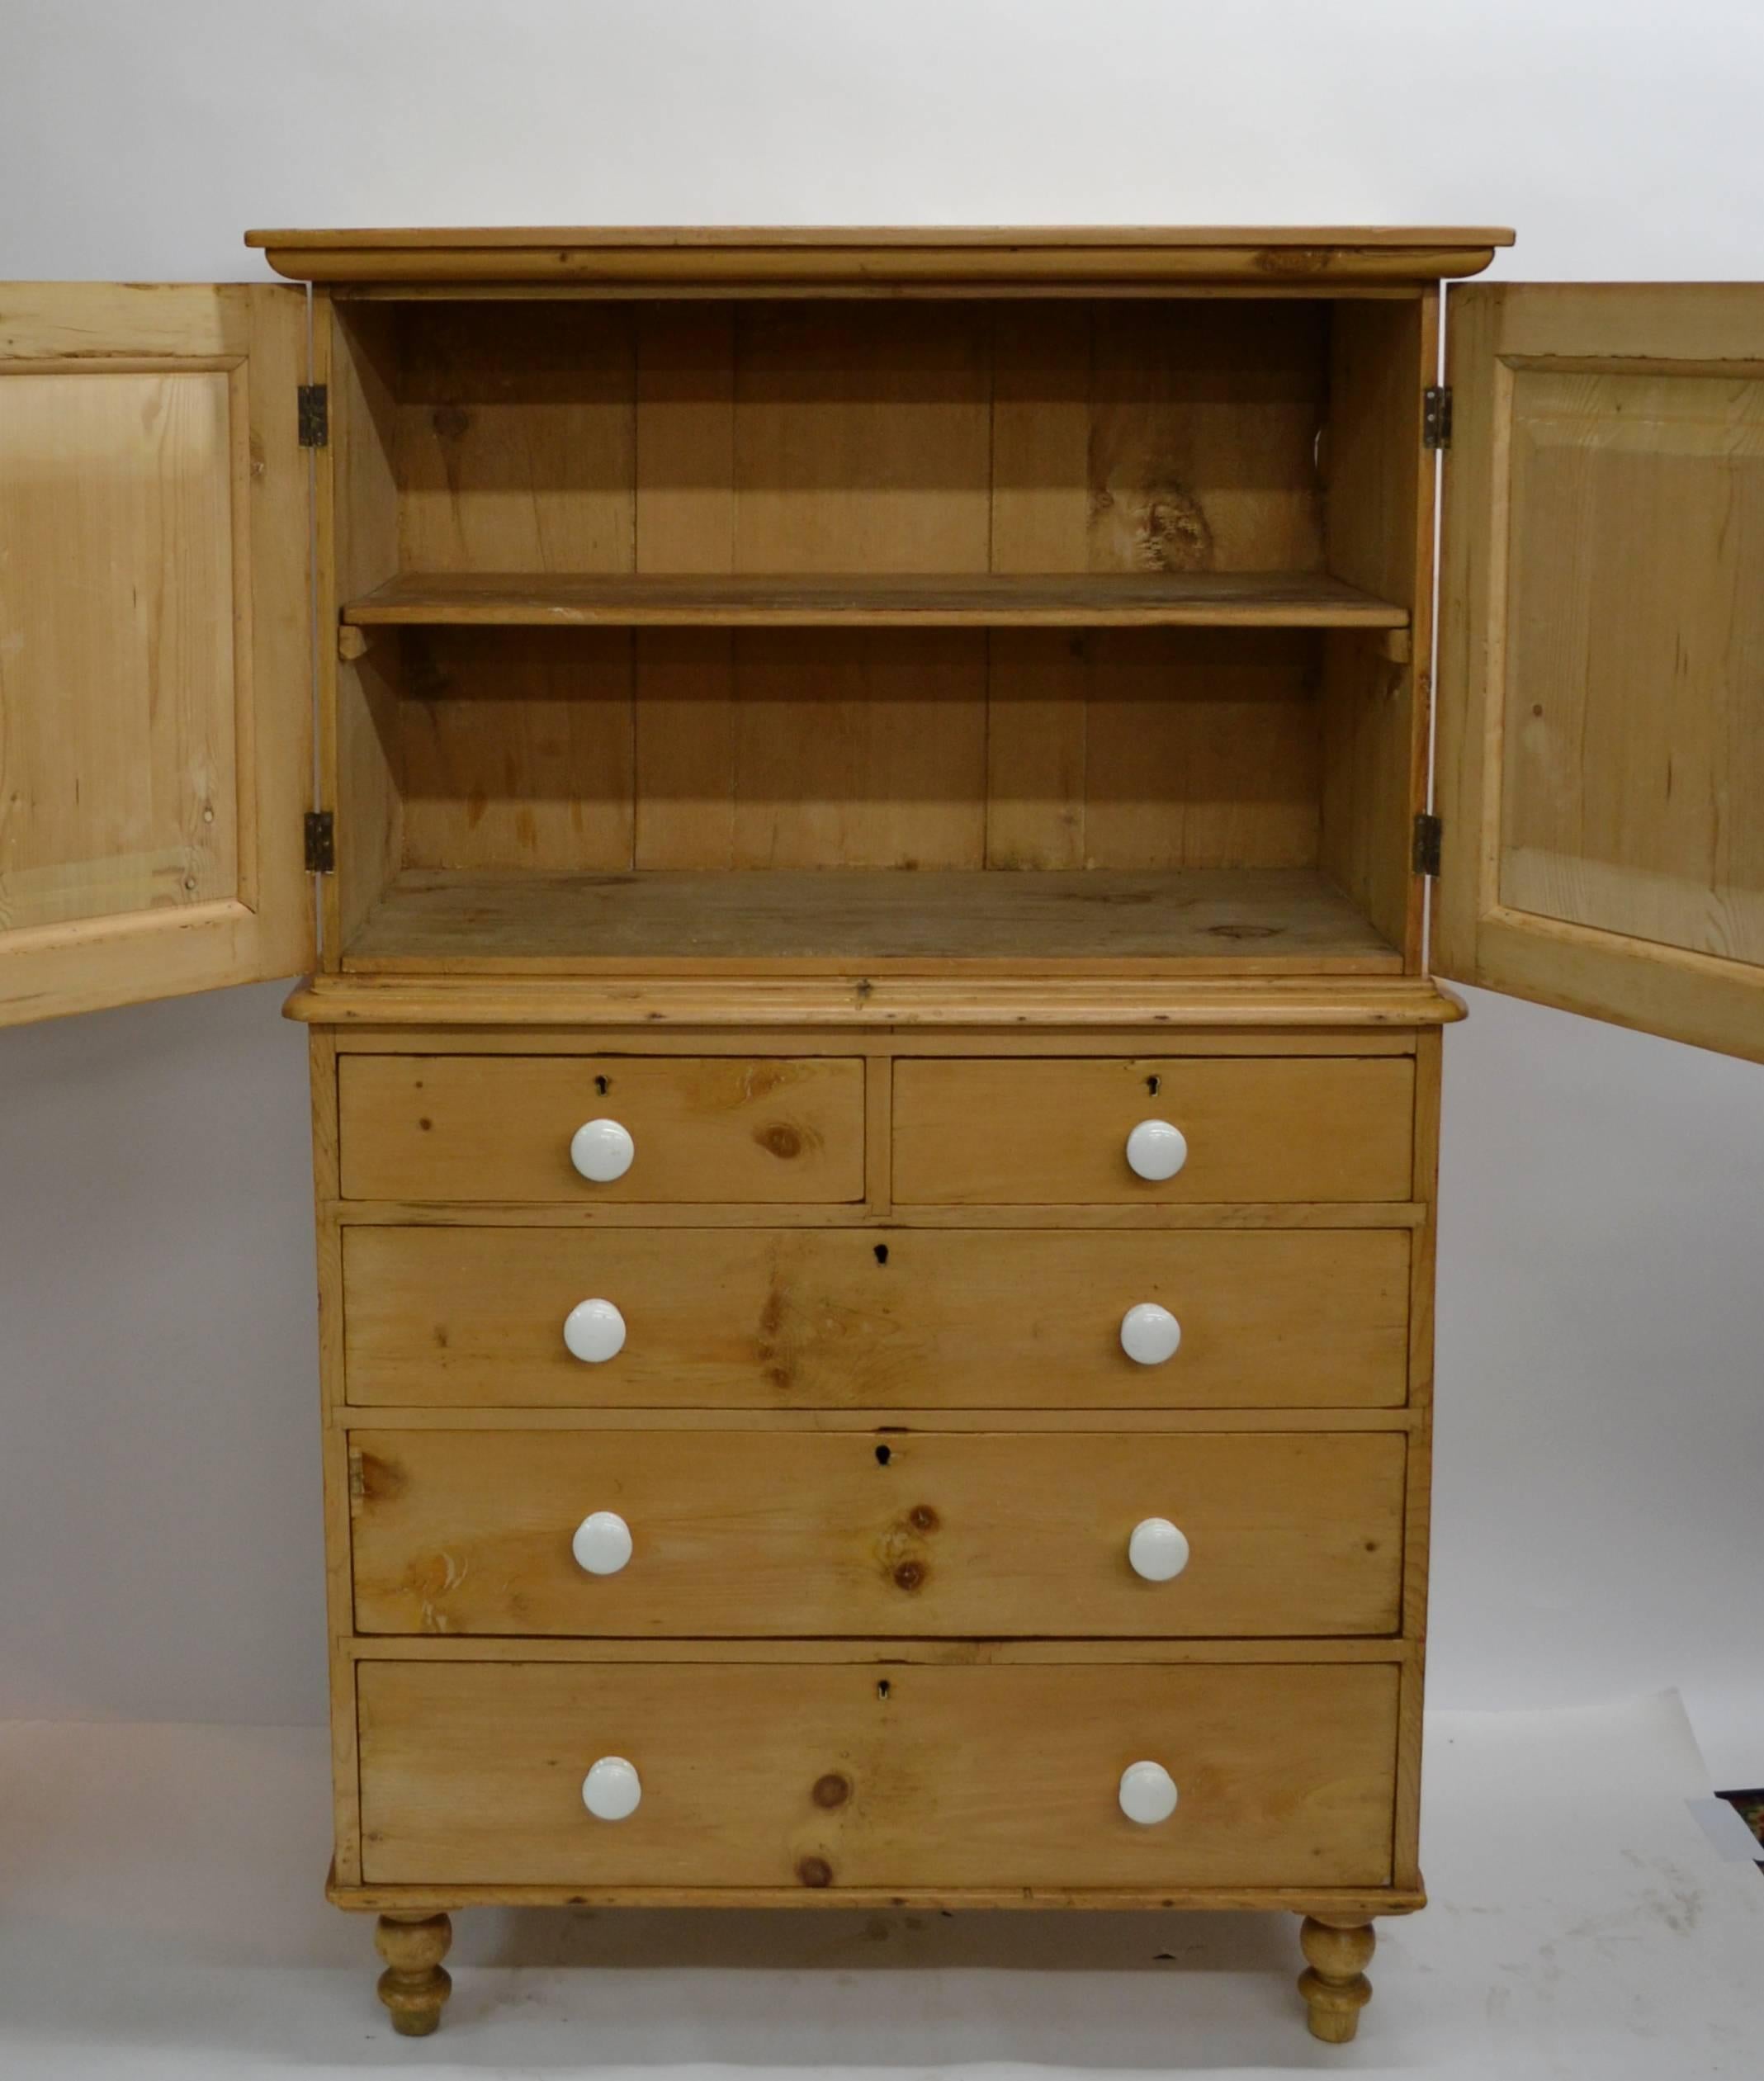 Rather like a diminutive linen press, this is a lovely little English pine cupboard on chest, built in two pieces.  The upper section has a bold but simple crown and two wide-swinging paneled doors with replaced ceramic knobs, which open to a